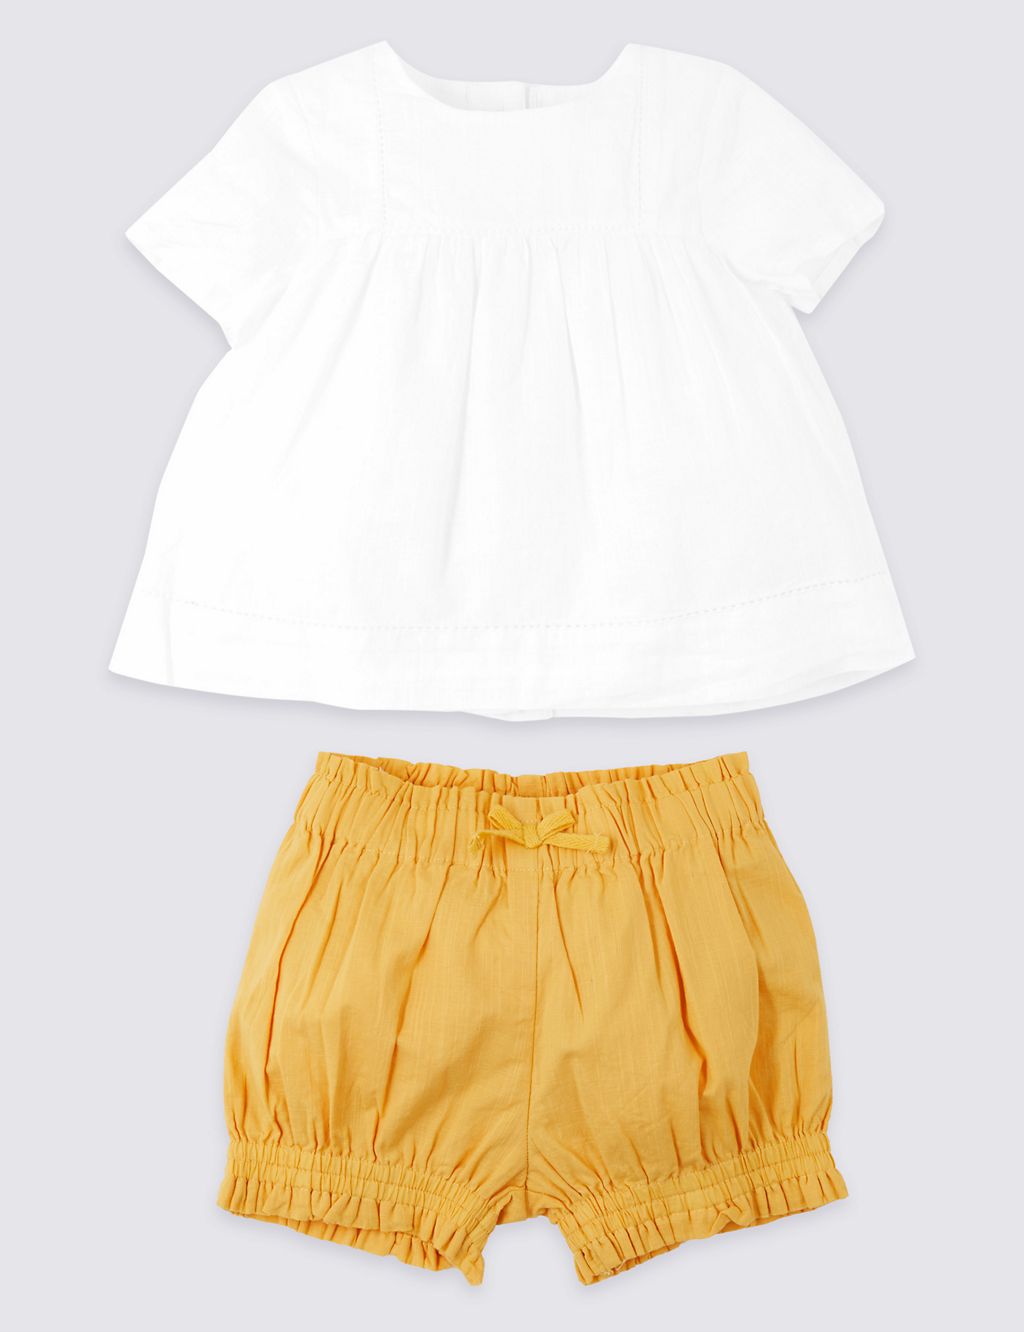 2 Piece Woven Top with Shorts Outfit 3 of 5